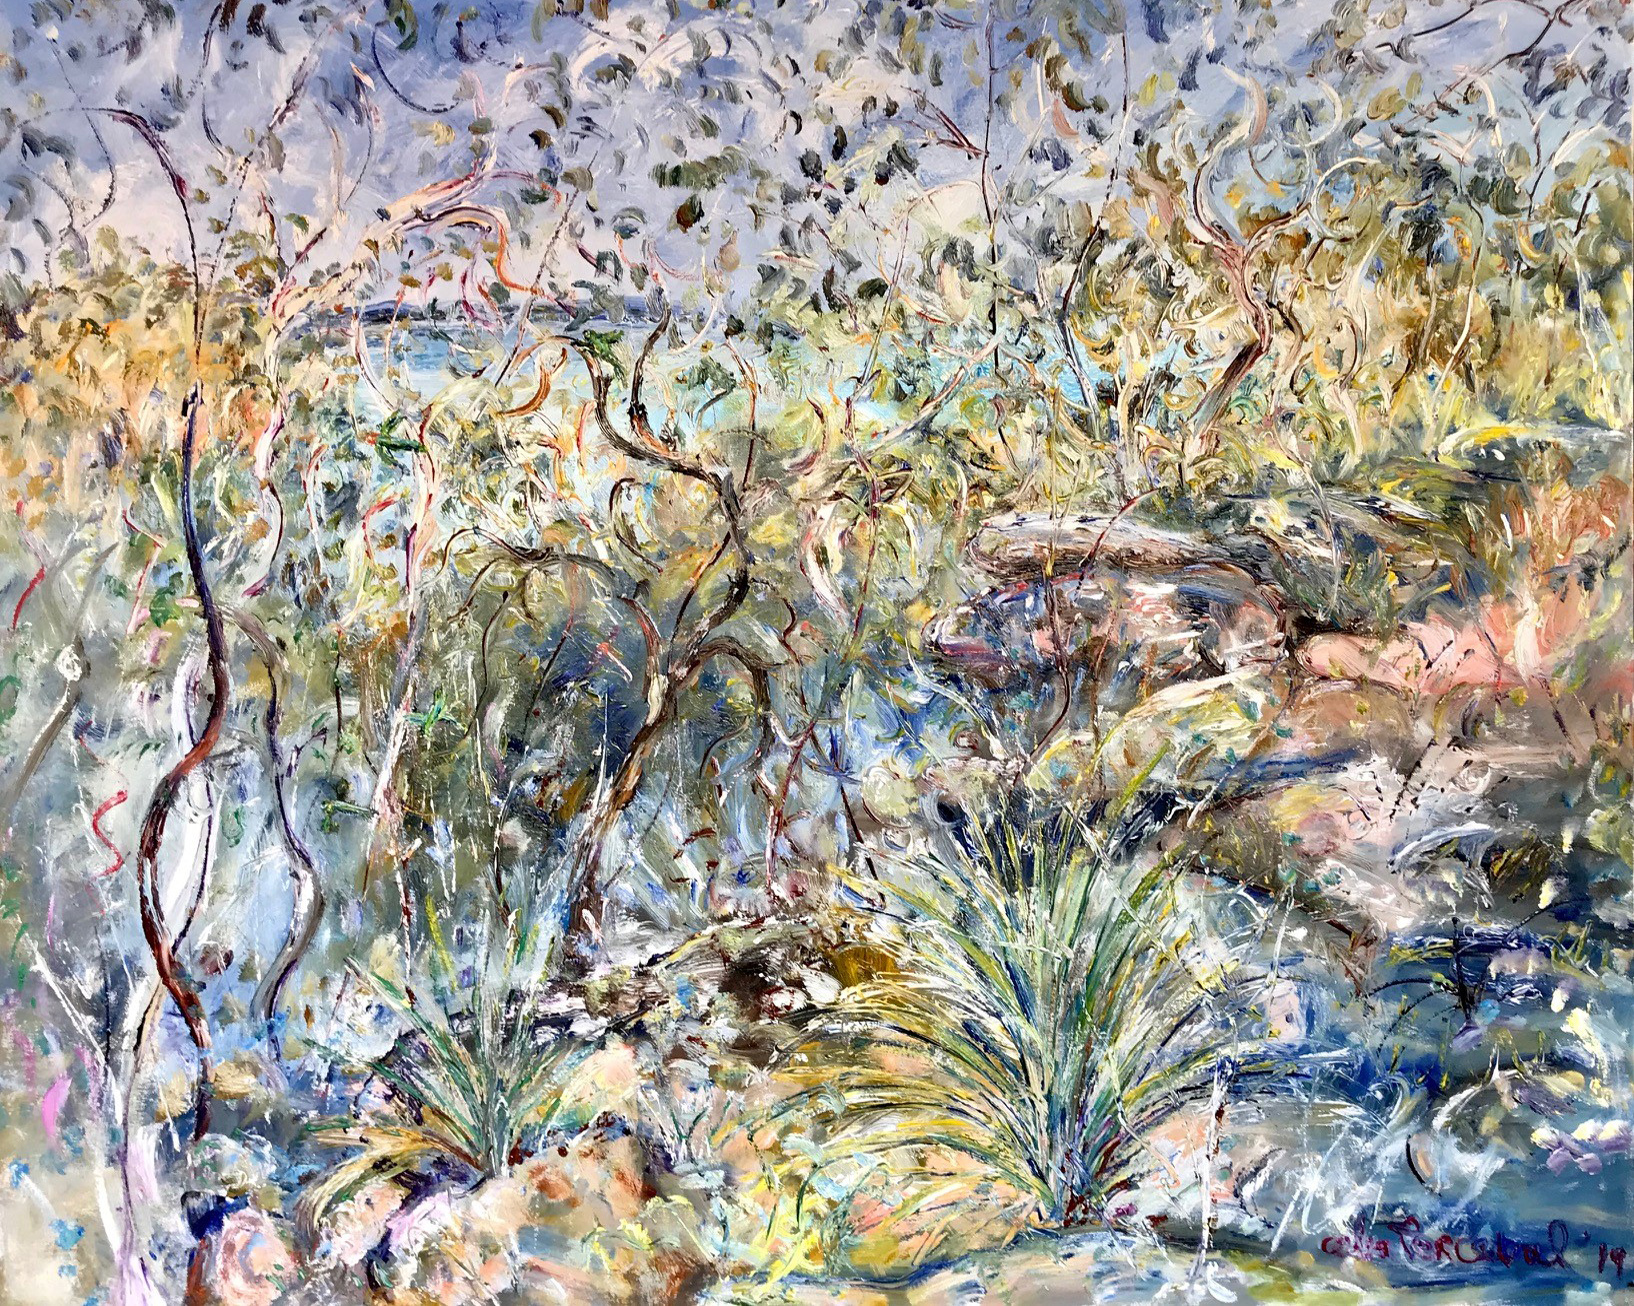 Perceval_Green Parrots and Rocky Ridge at Yenabilli Point_123 x 152cm